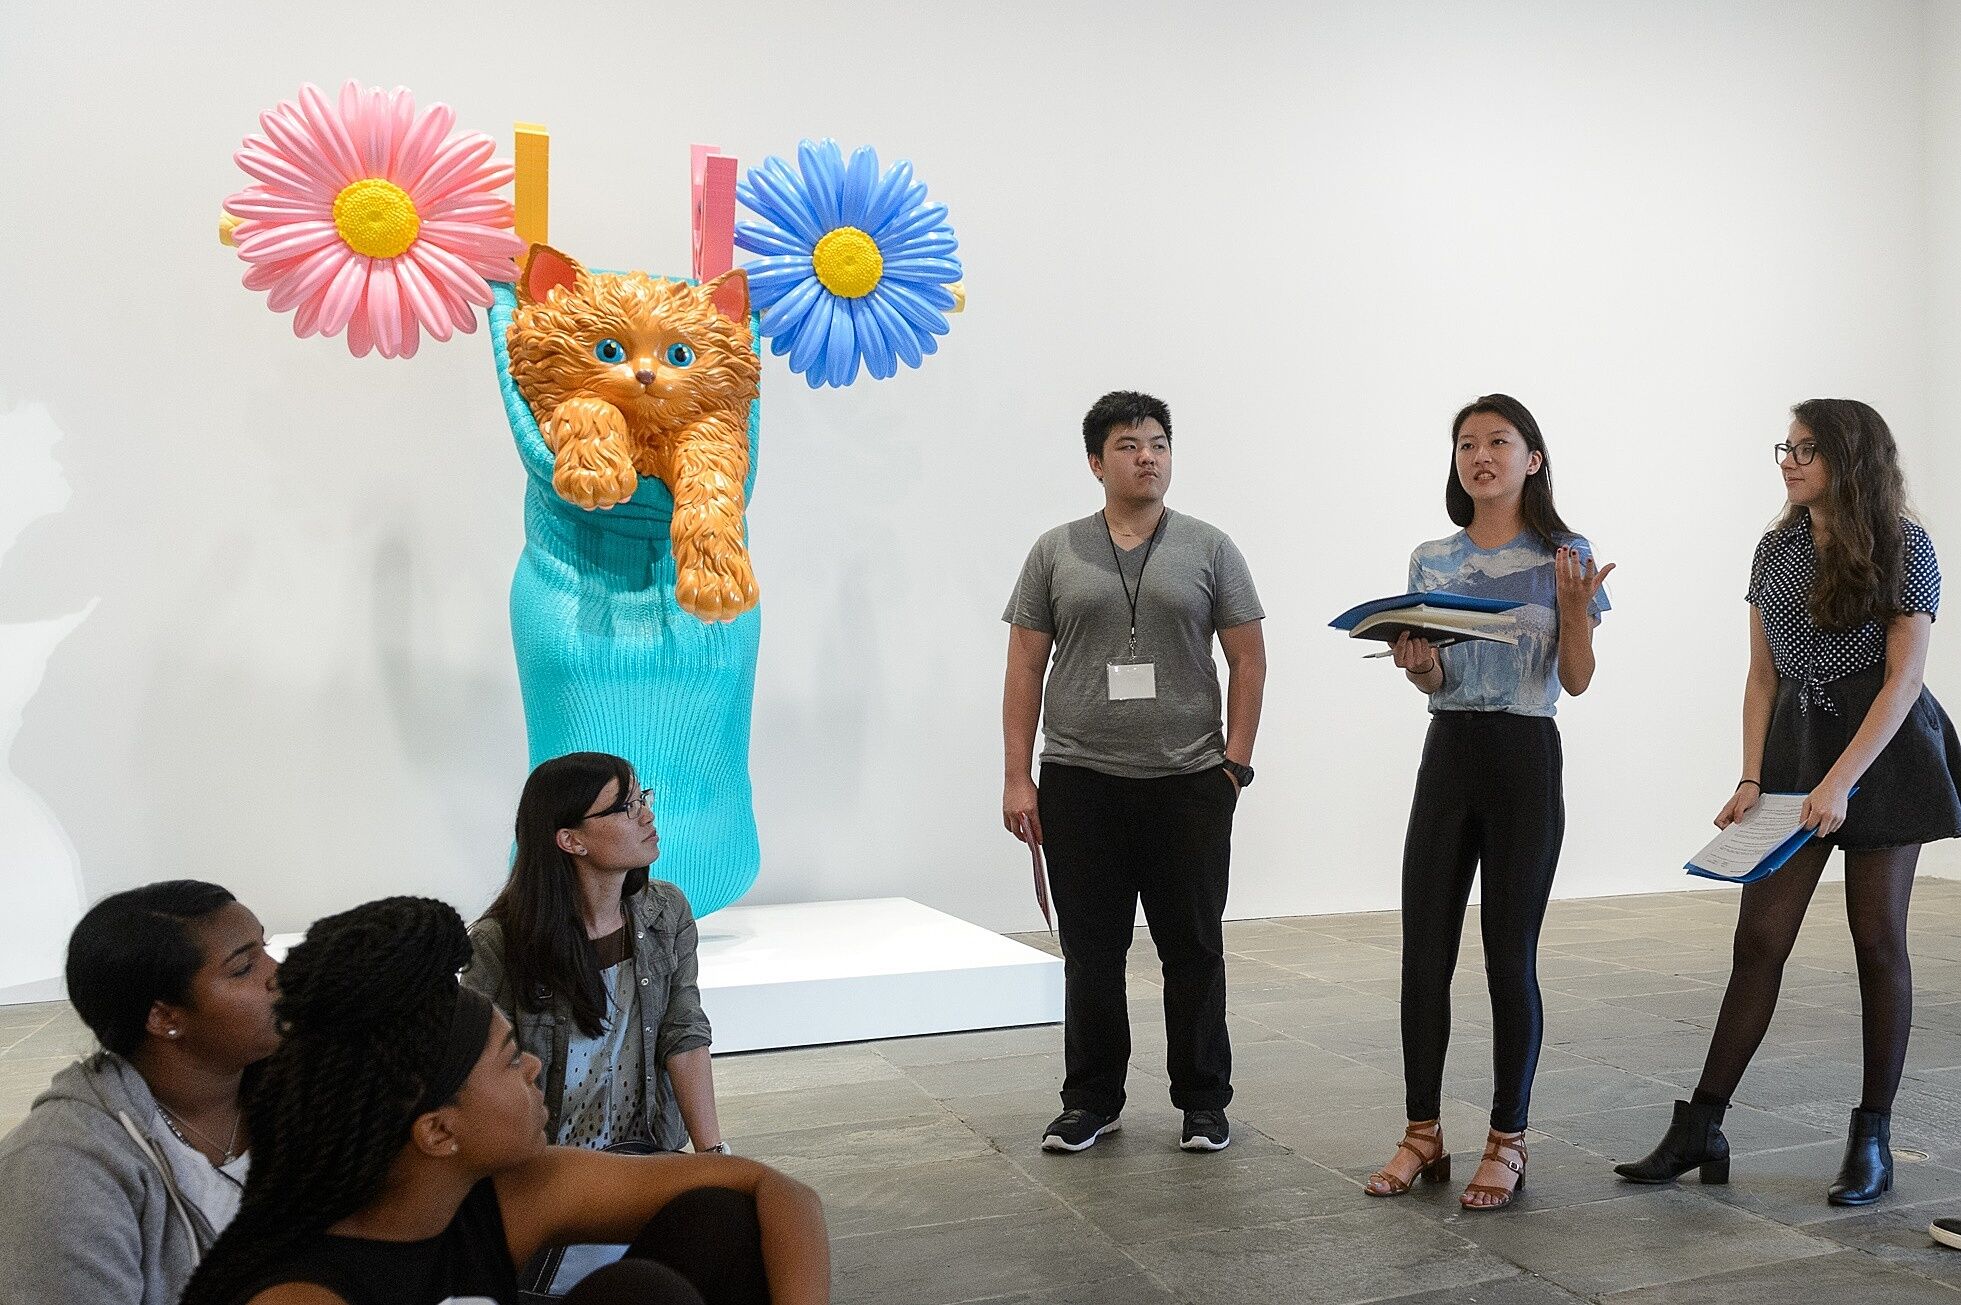 Teens stand talking next to a sculpture of a cat in a bag.